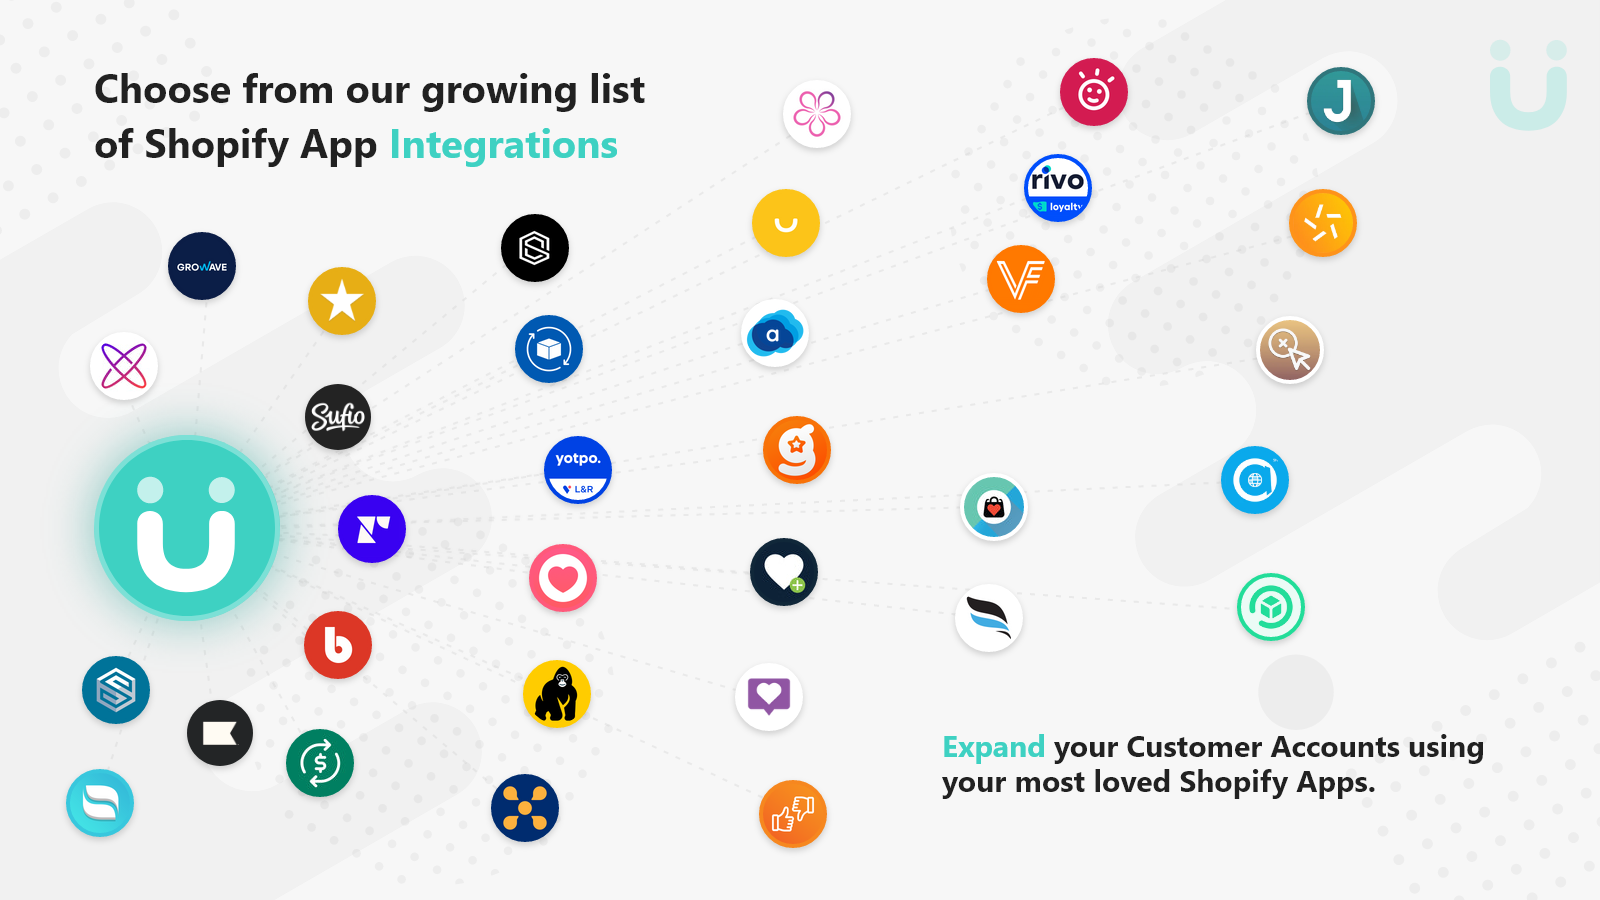 Choose from our growing list of 78 App Integrations